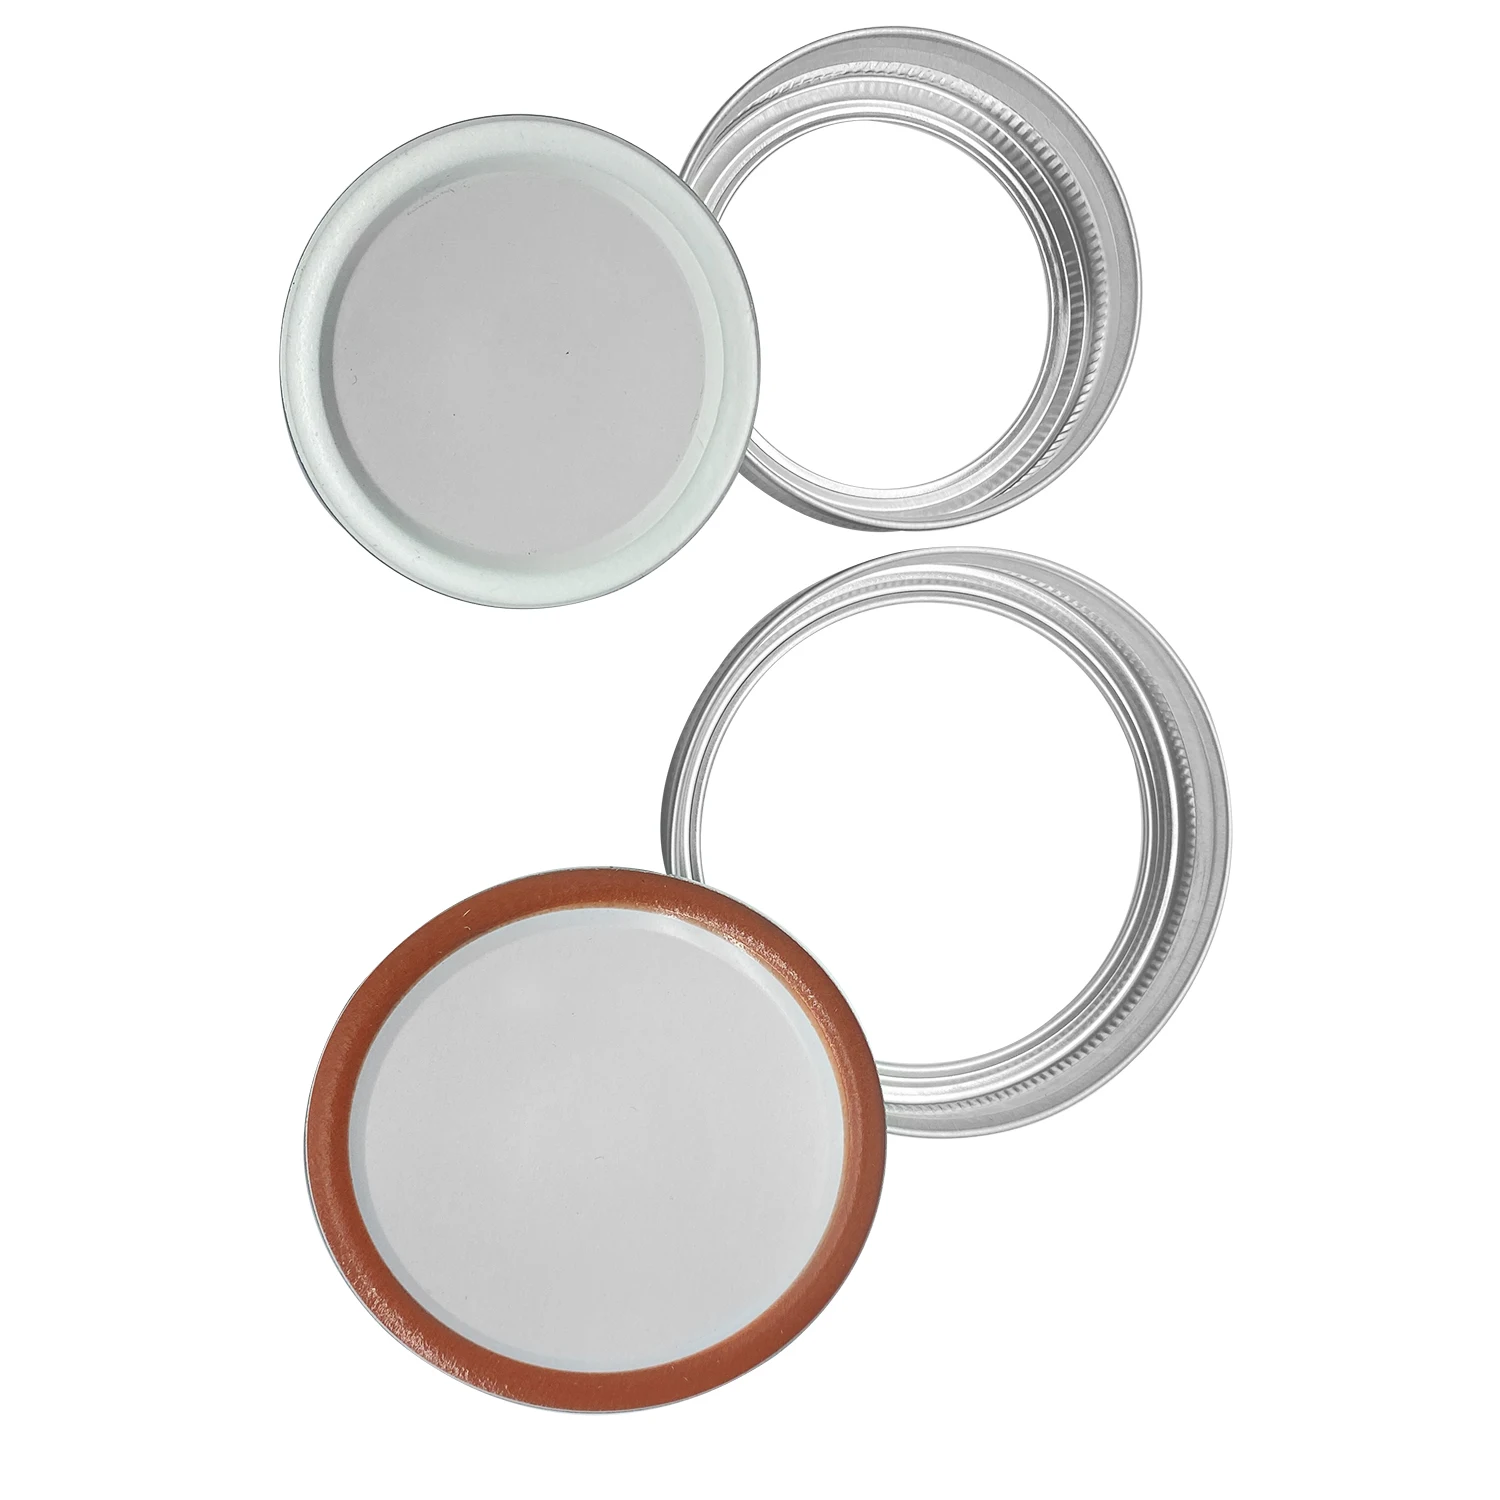 

Regular Mouth 70MM Mason Jar Canning Lids, Reusable Leak Proof Split-Type Silver Lids with Silicone Seals Rings